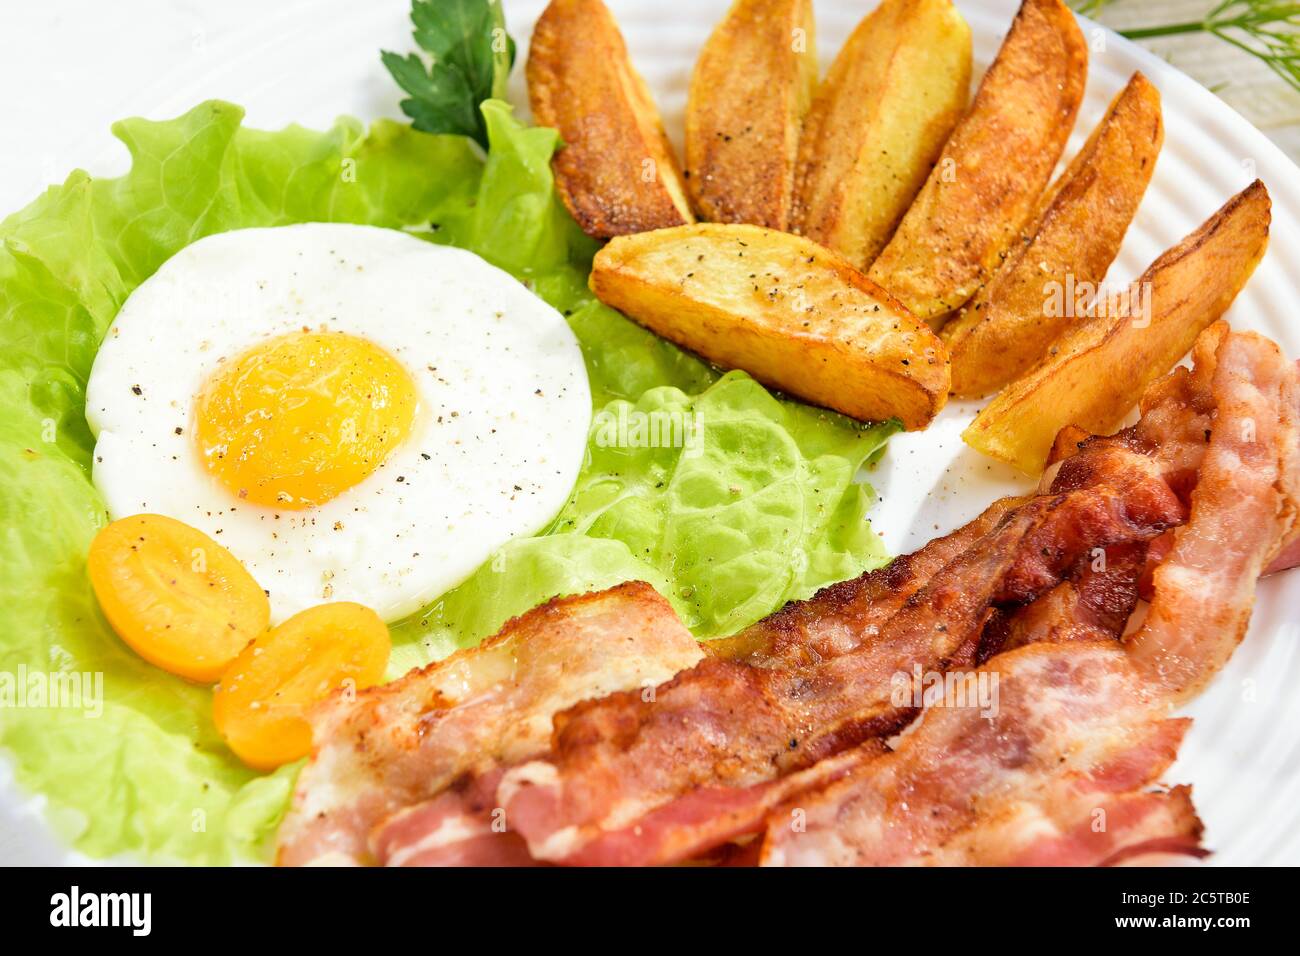 French fries and egg with bacon on top in a white bowl, on a large table with greens. Stock Photo